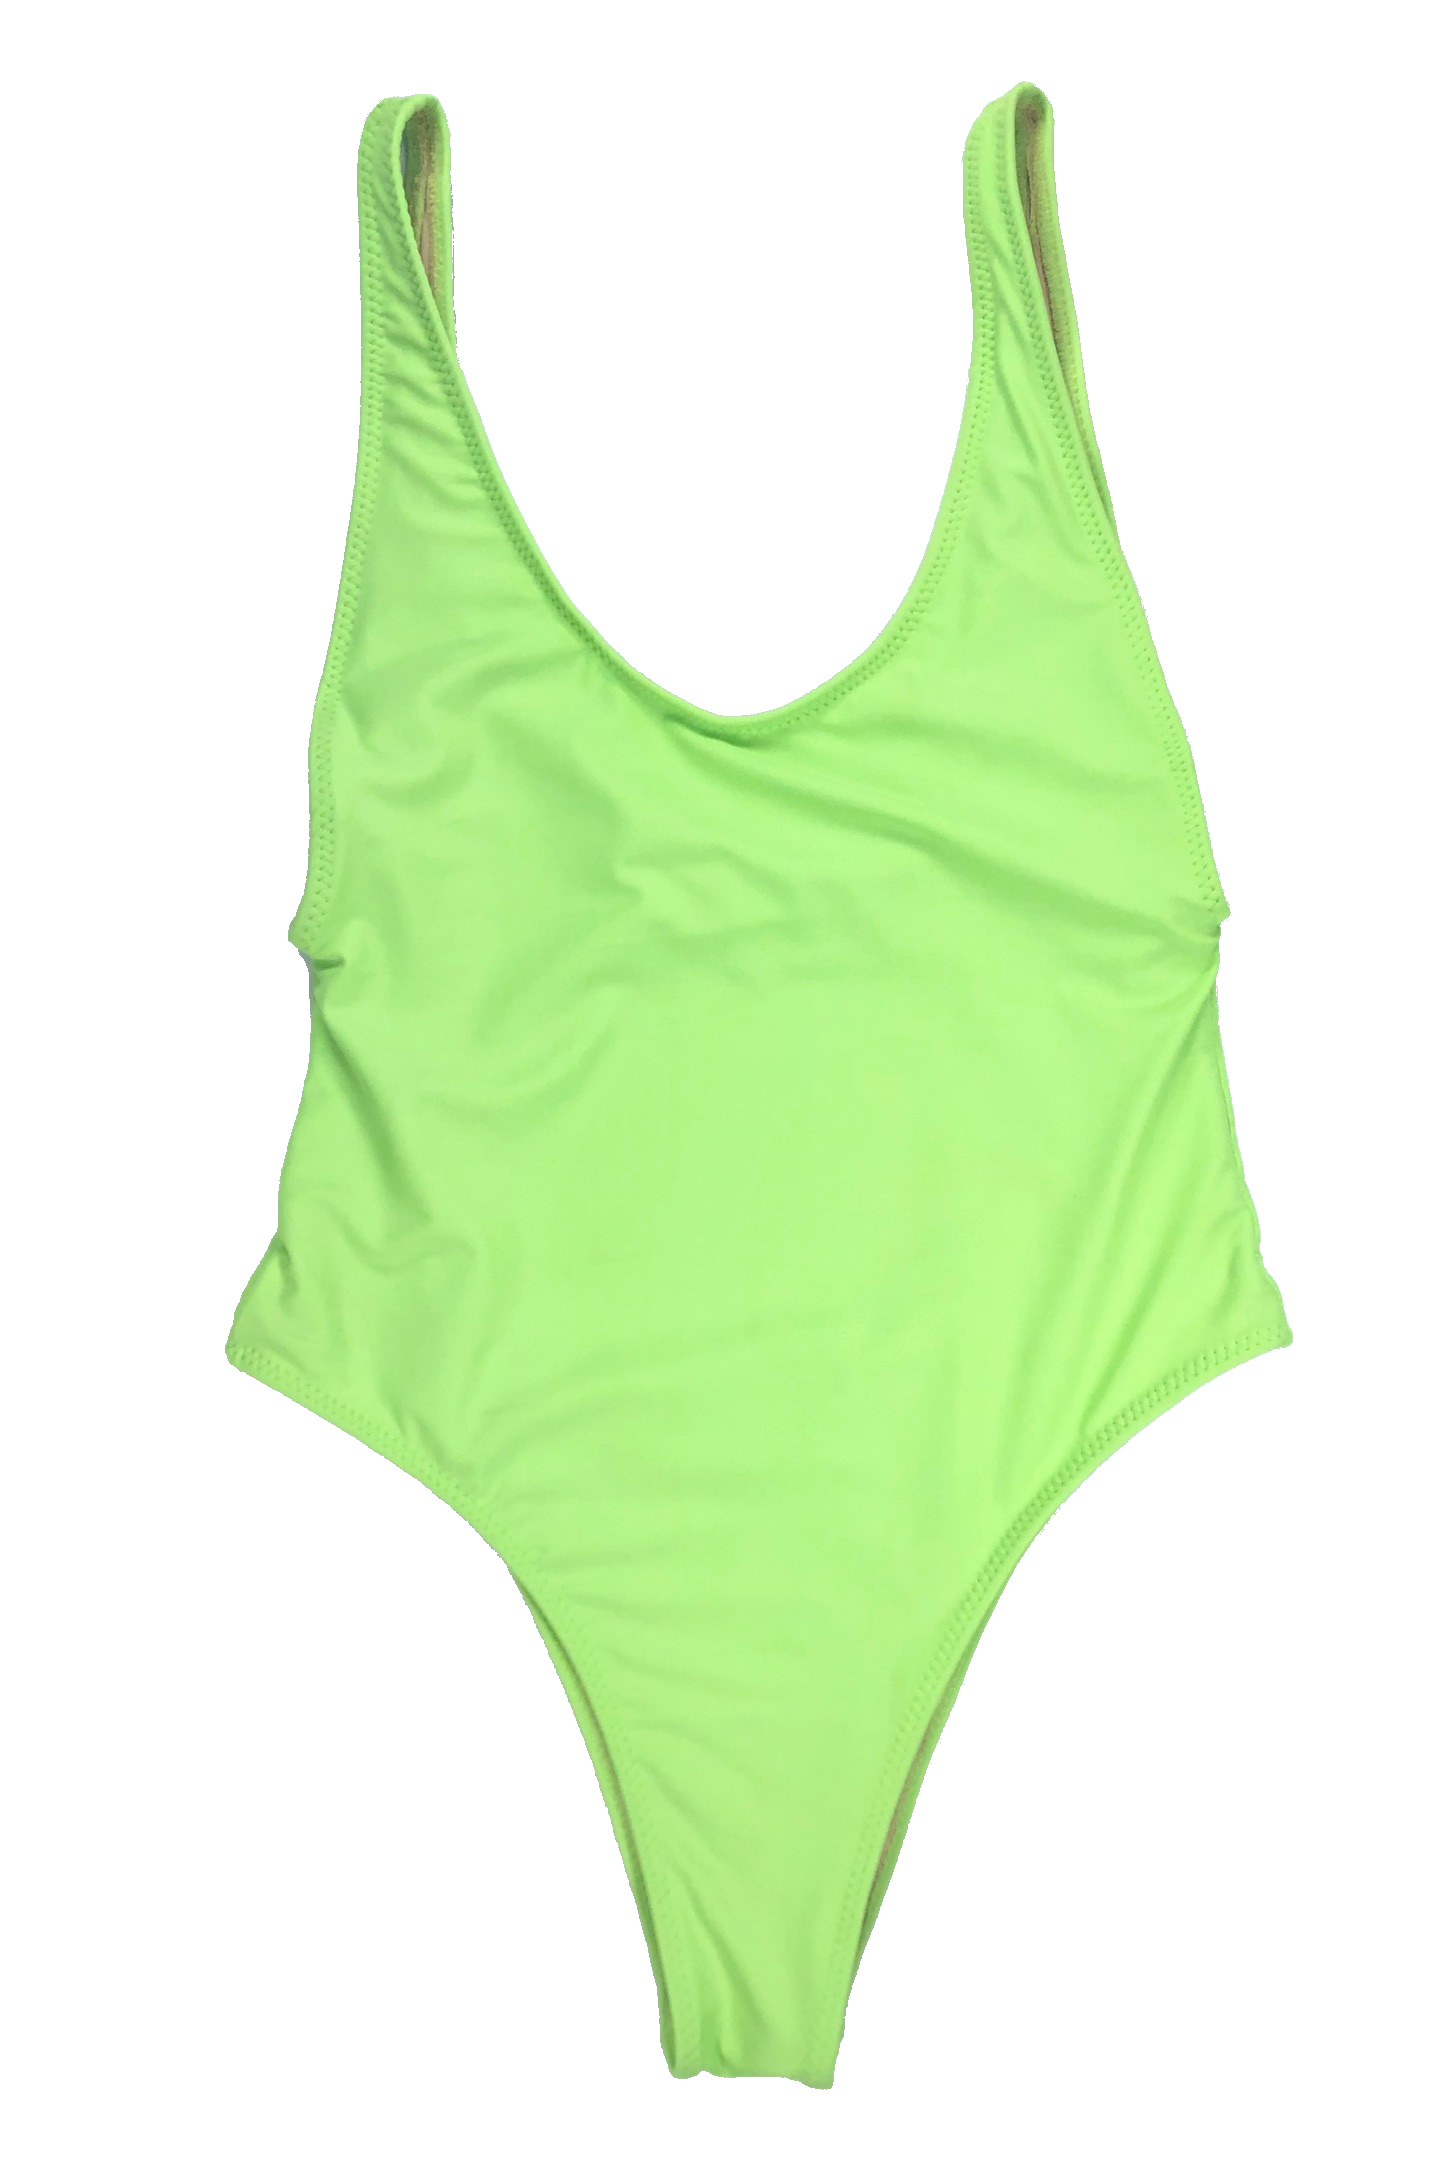 wendolin-designs - Wendolin Designs - Swimsuit - One Piece Swimsuit High Cut-Color Neon Green